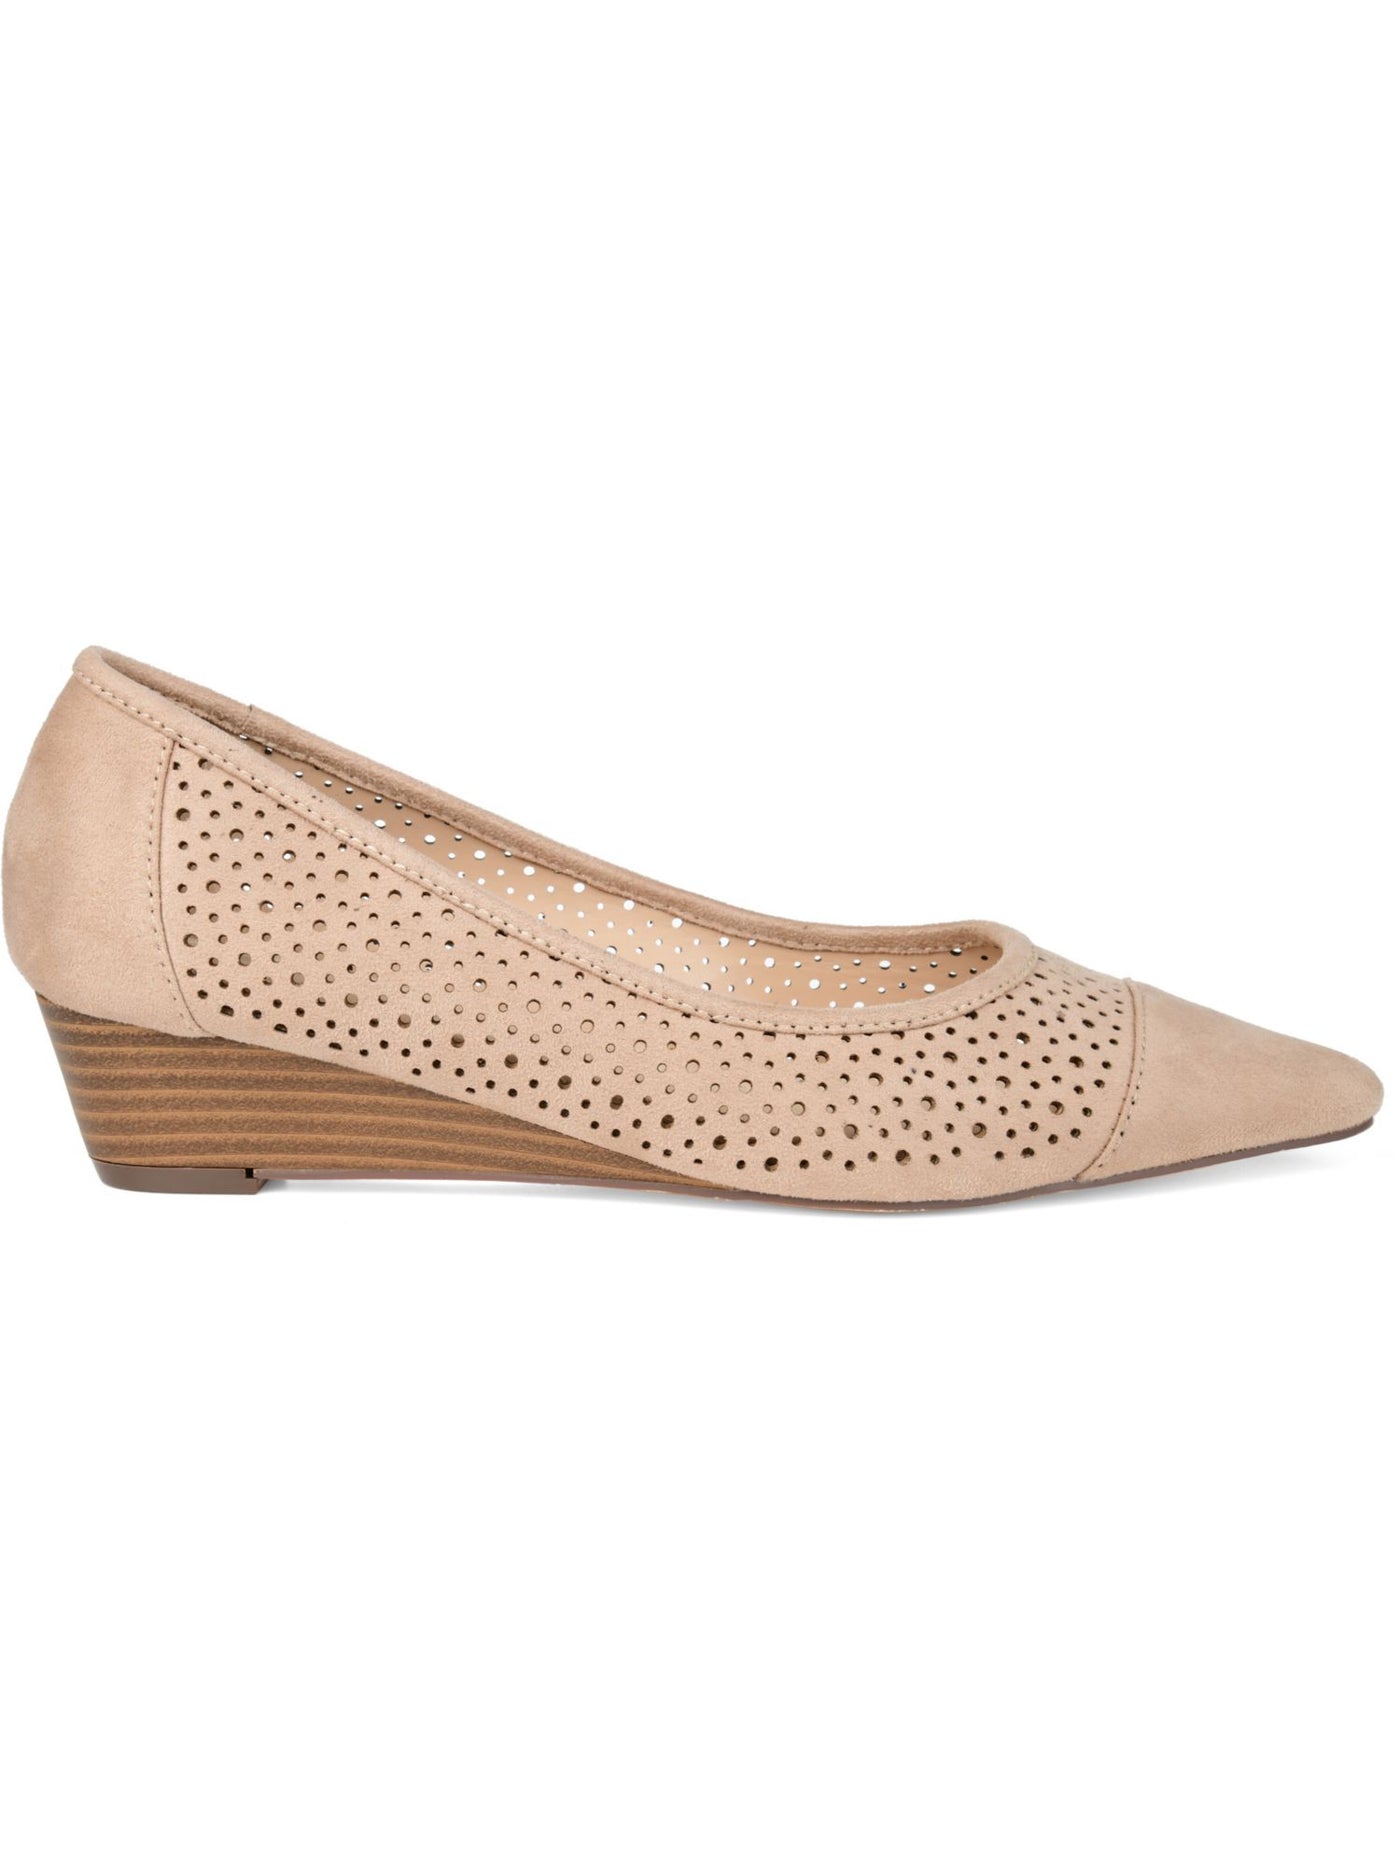 JOURNEE COLLECTION Womens Pink Perforated Padded Finnola Pointed Toe Wedge Slip On Pumps 7.5 M